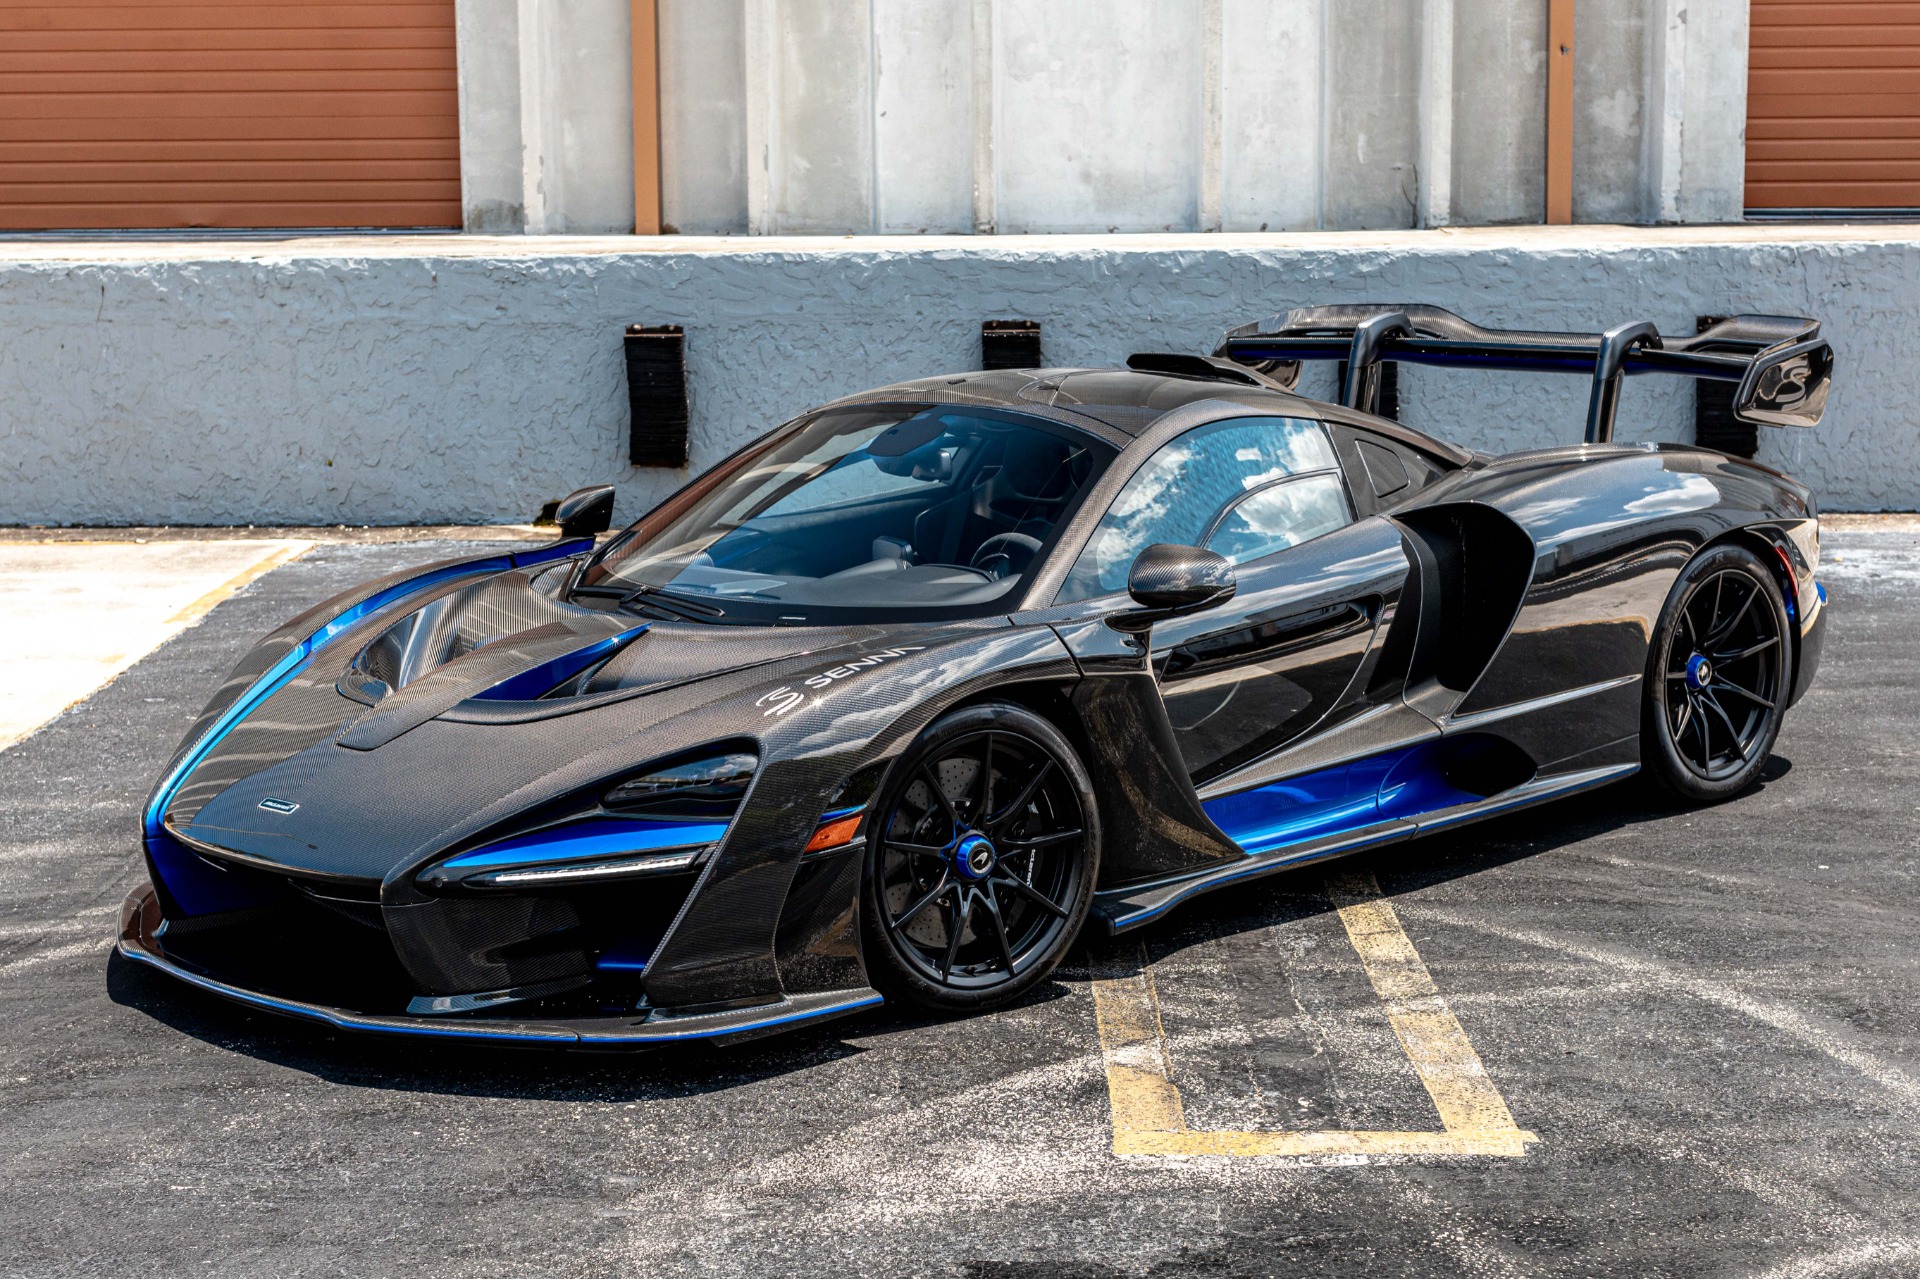 Used 2019 McLaren Senna In Full Exposed Gloss Carbon with Electric Blue  Accents For Sale (Sold)